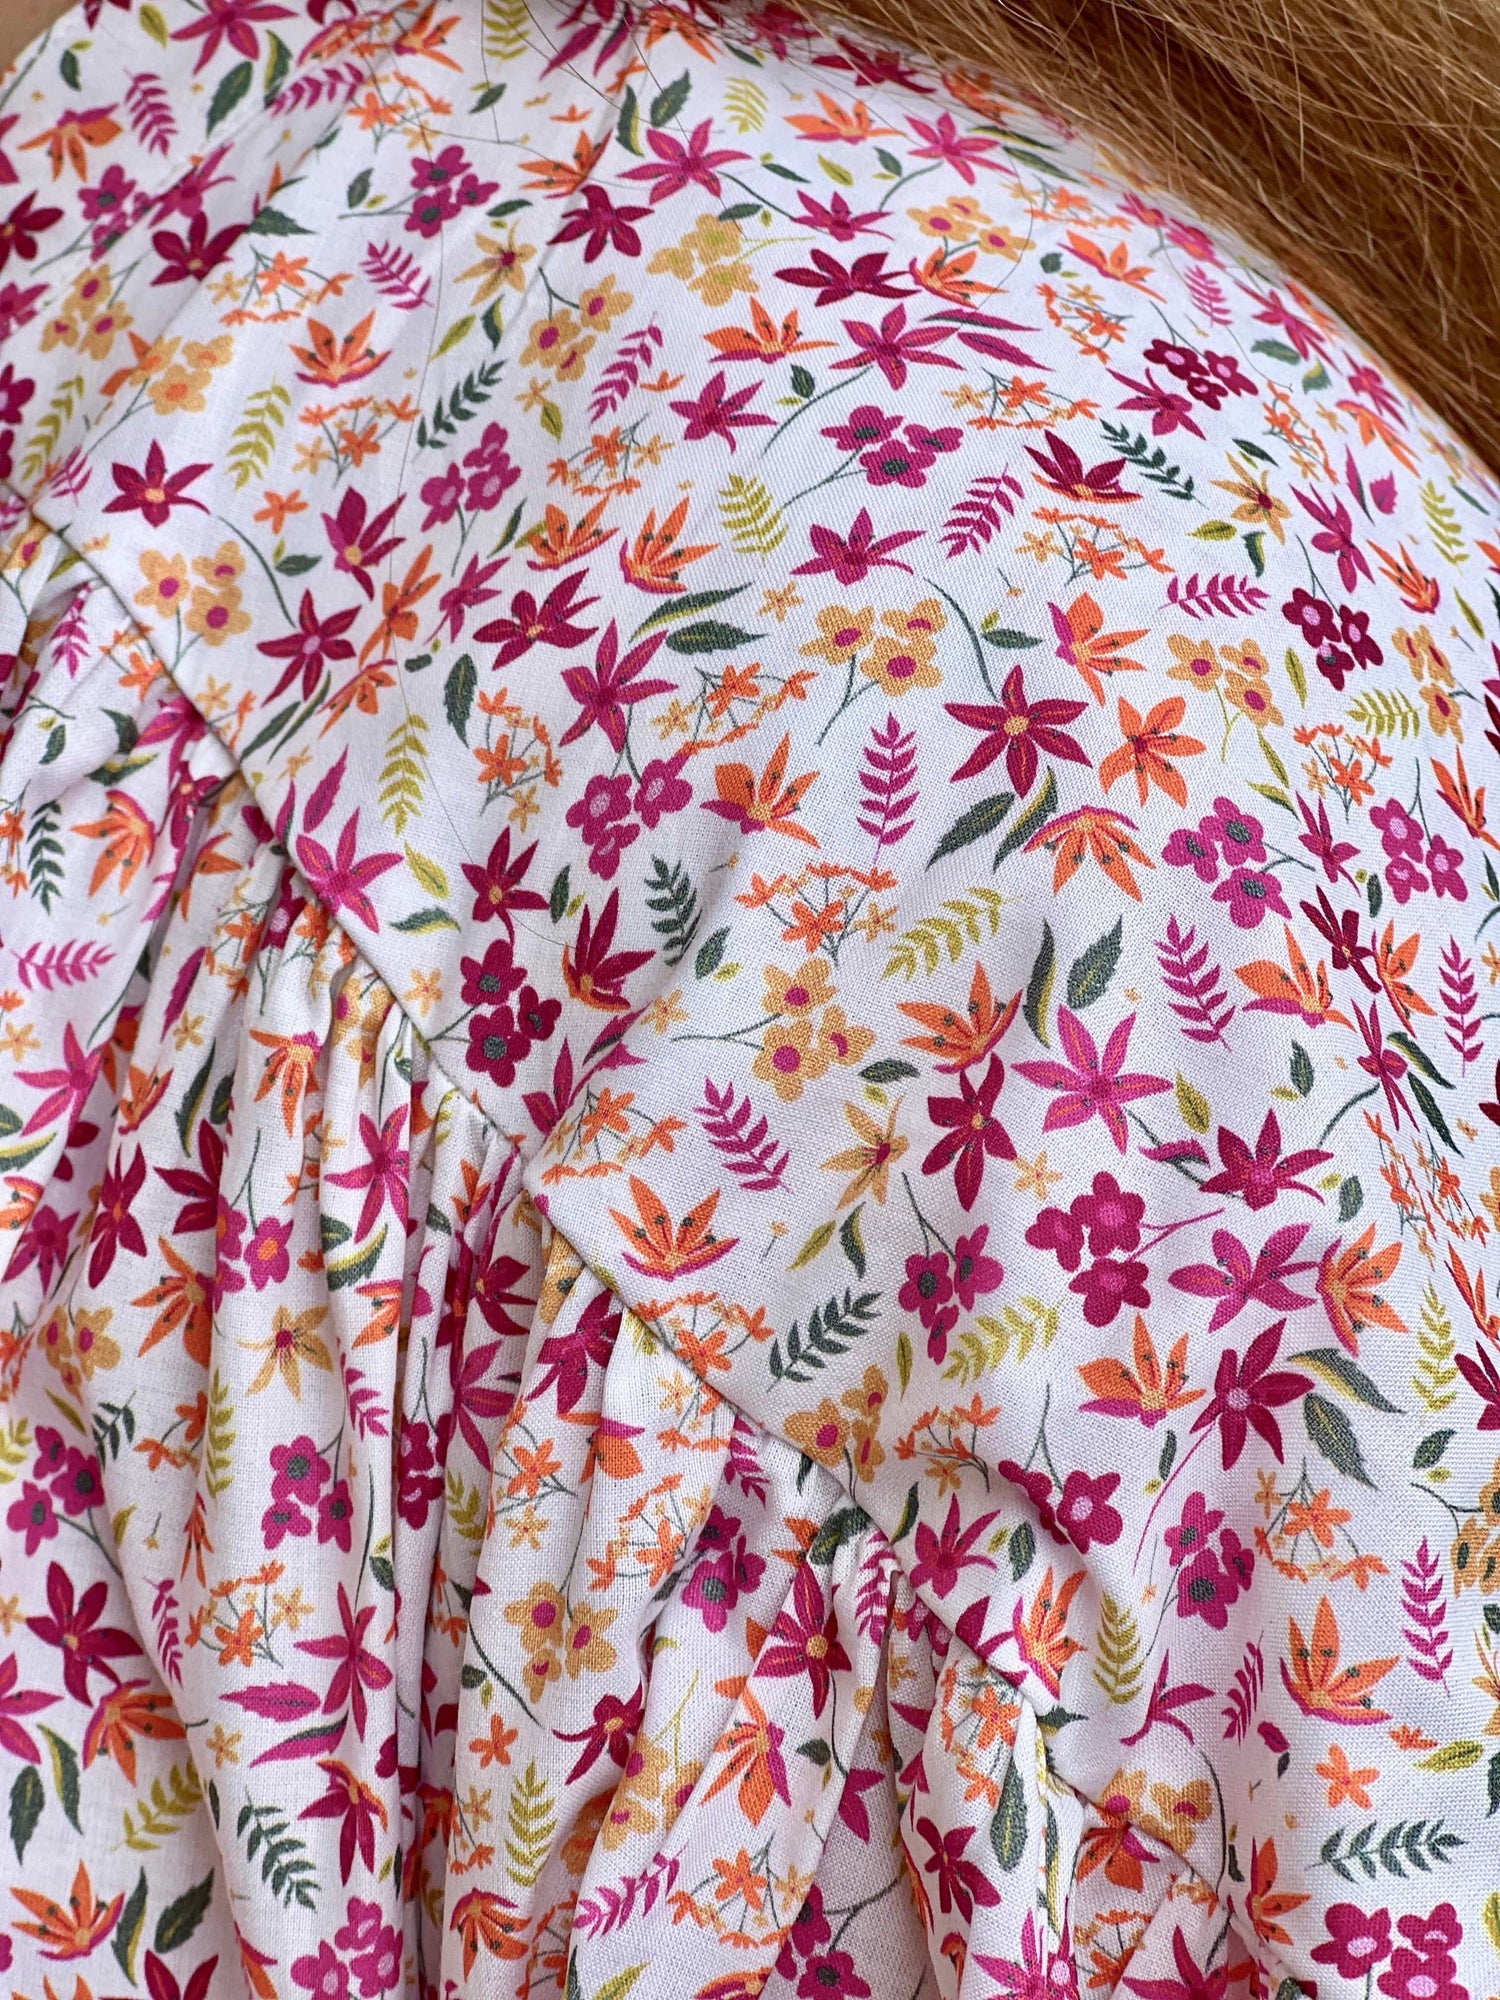 Large floral blouse with gathers and patterns